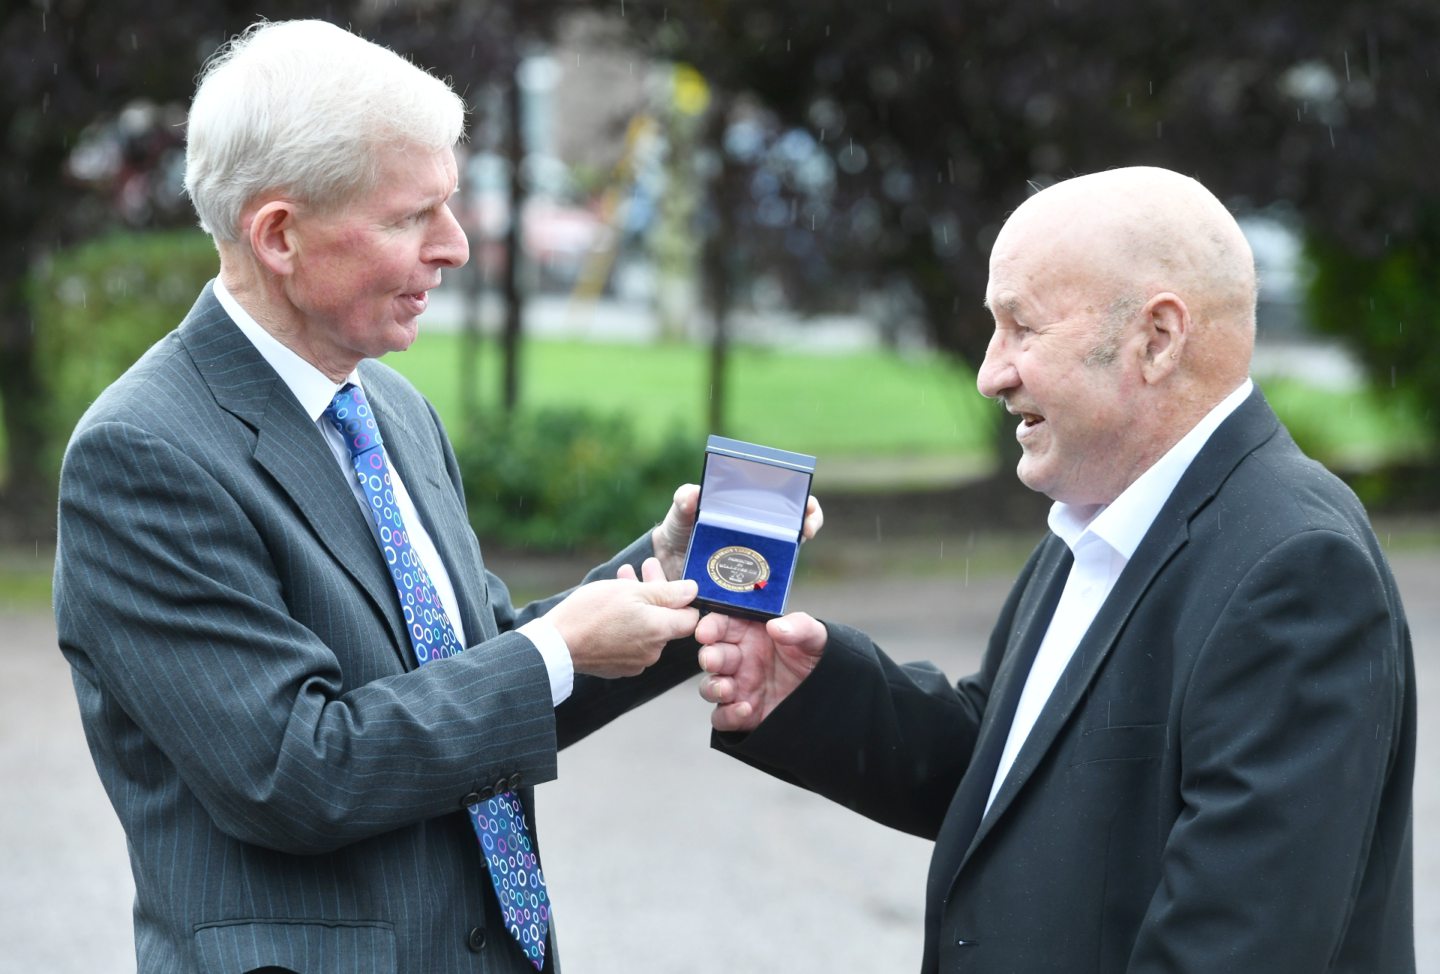 Joseph is pictured with Dr Ken McHardy who presented him with the medal at Inverbervie Health Centre.